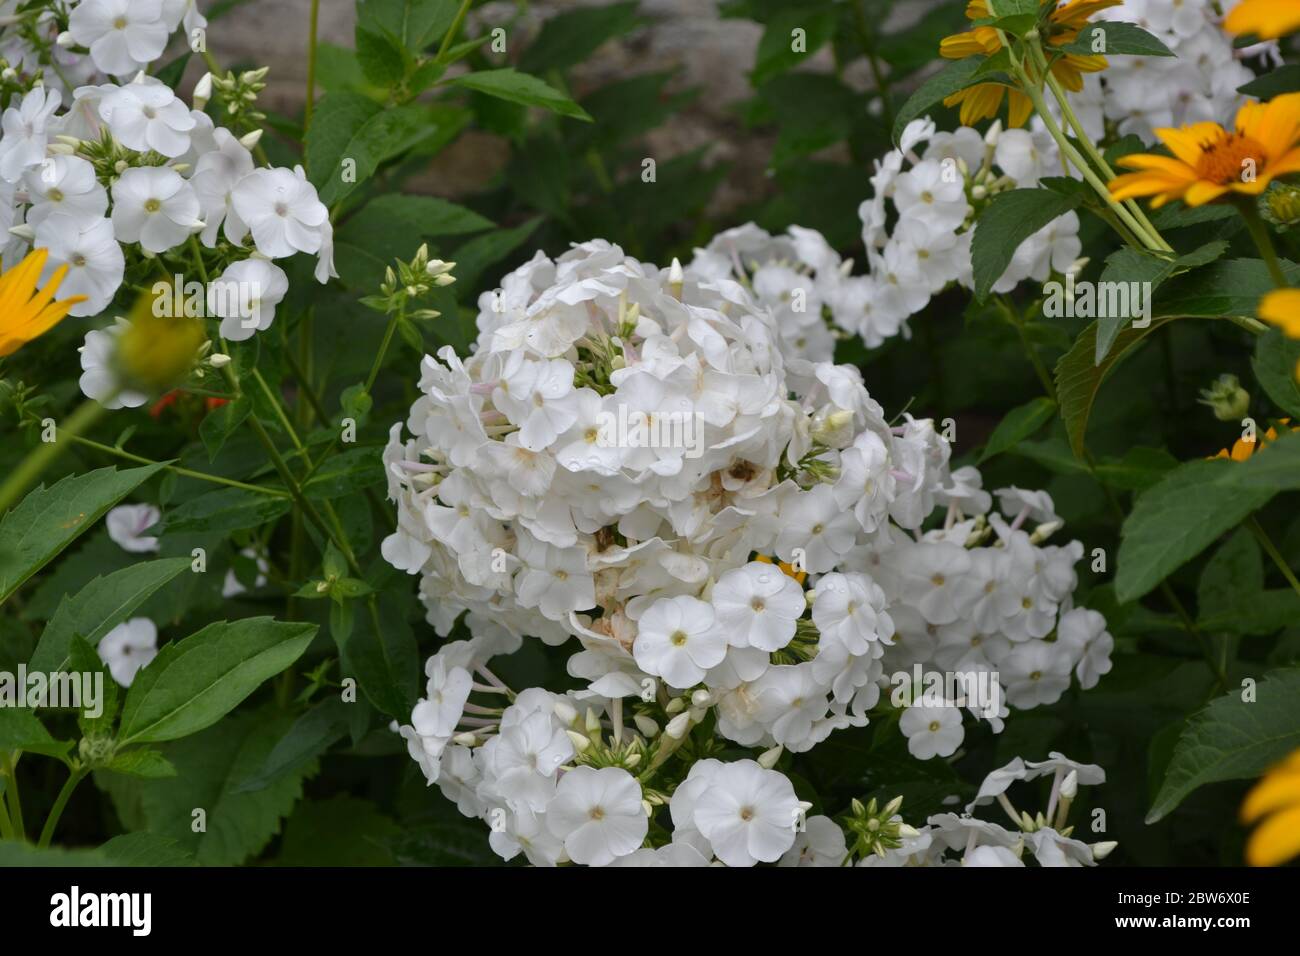 Green. Gardening. Home garden. Phlox flower. Perennial herbaceous plant. High branches. White flowers Stock Photo